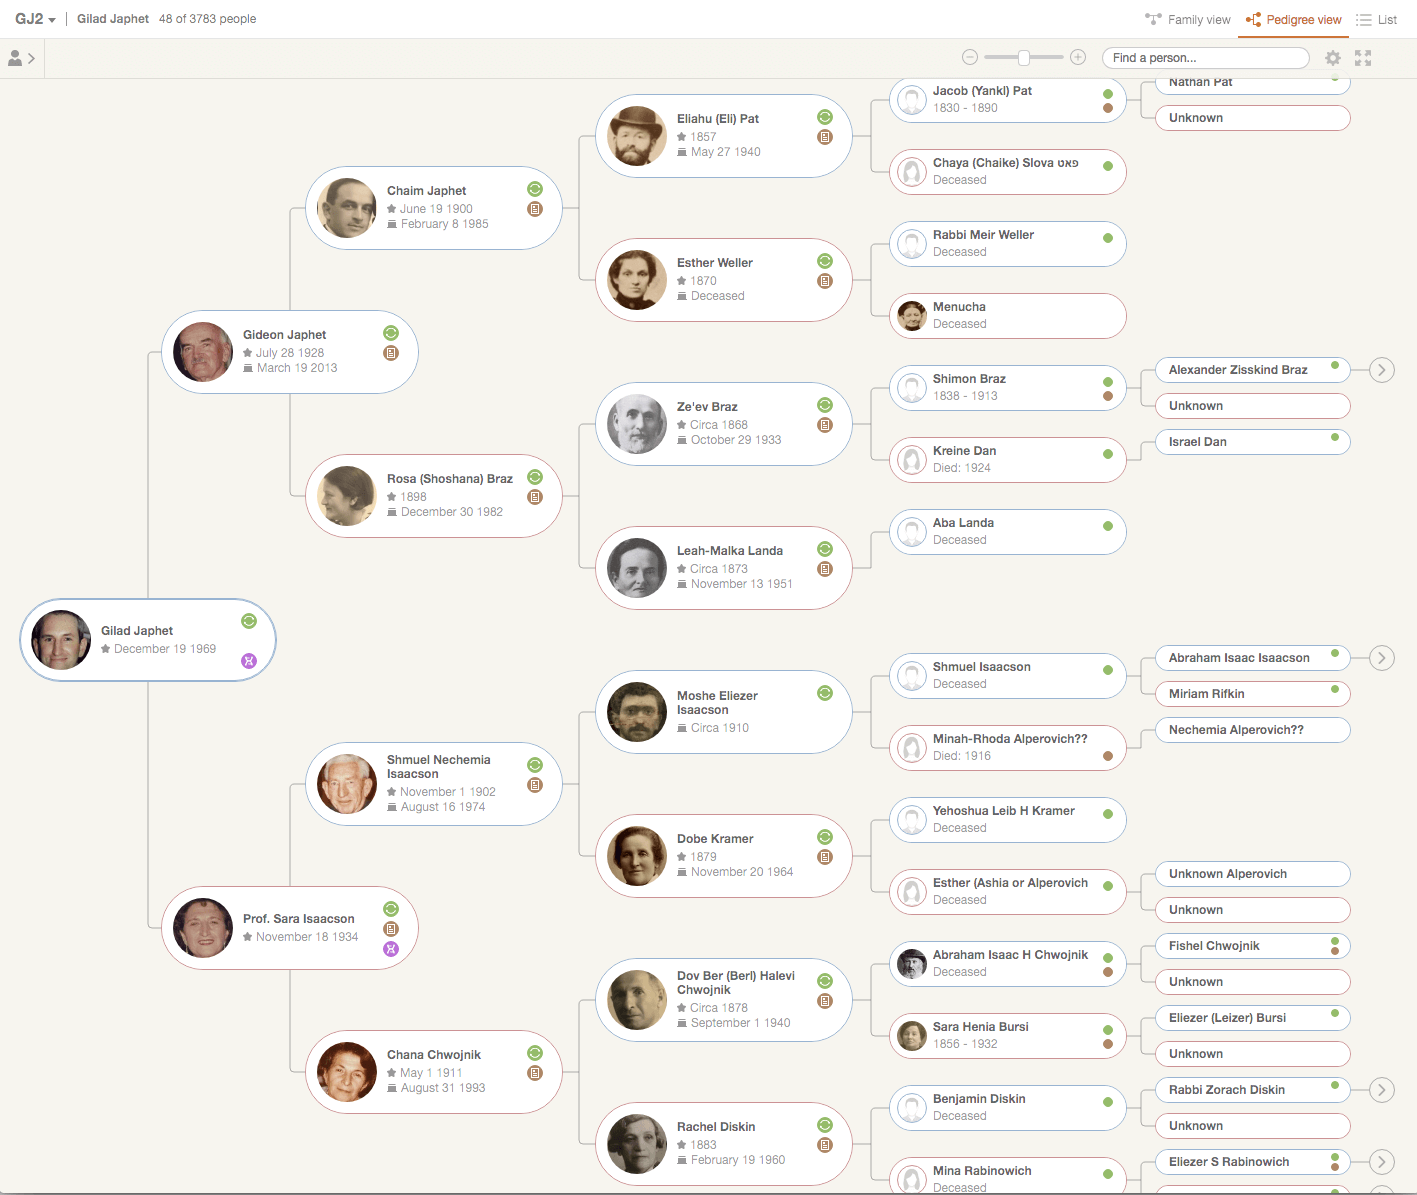 Family tree in Pedigree view mode – this example comes from the family tree of MyHeritage’s founder